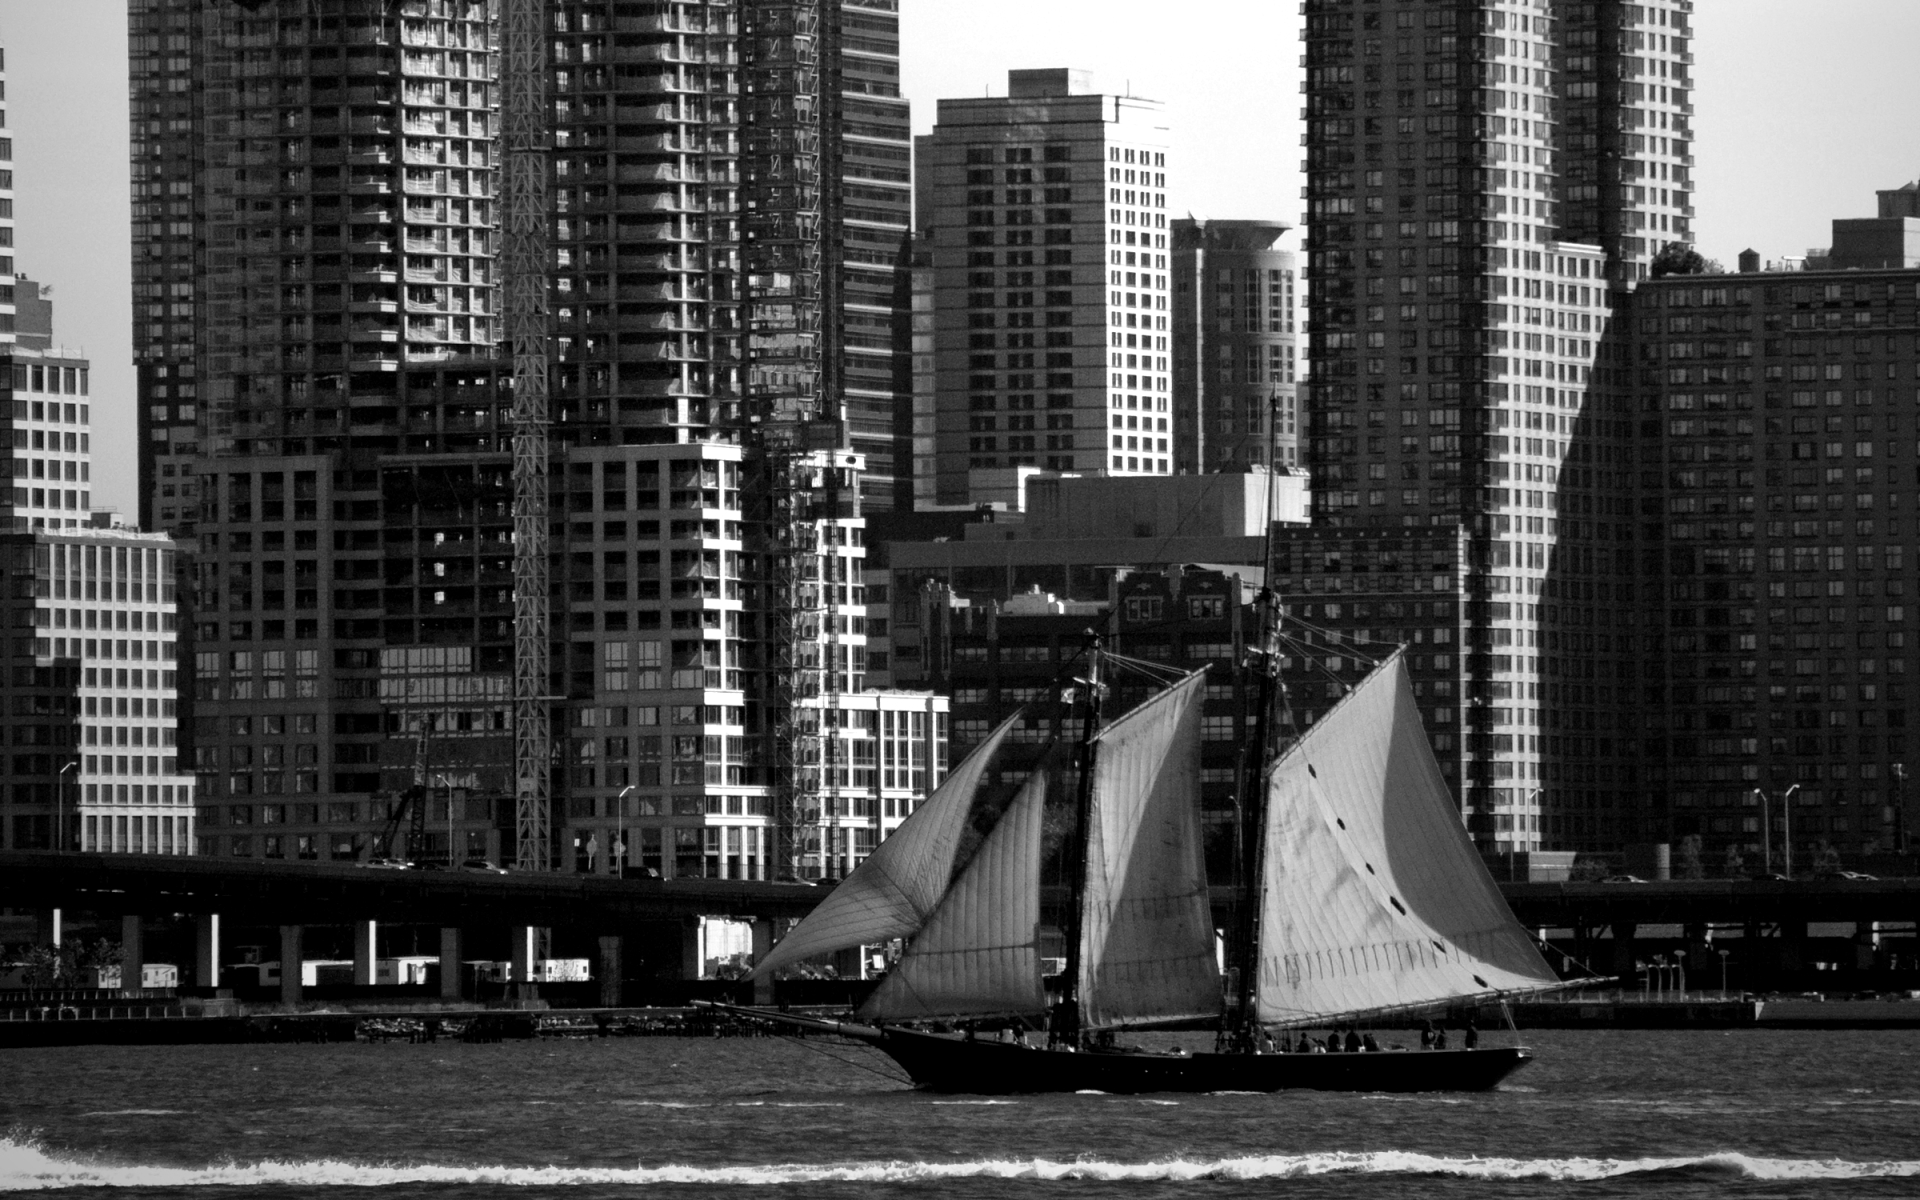 cityscapes, Architecture, Buildings, Vehicles, Sailboats, Rivers Wallpaper